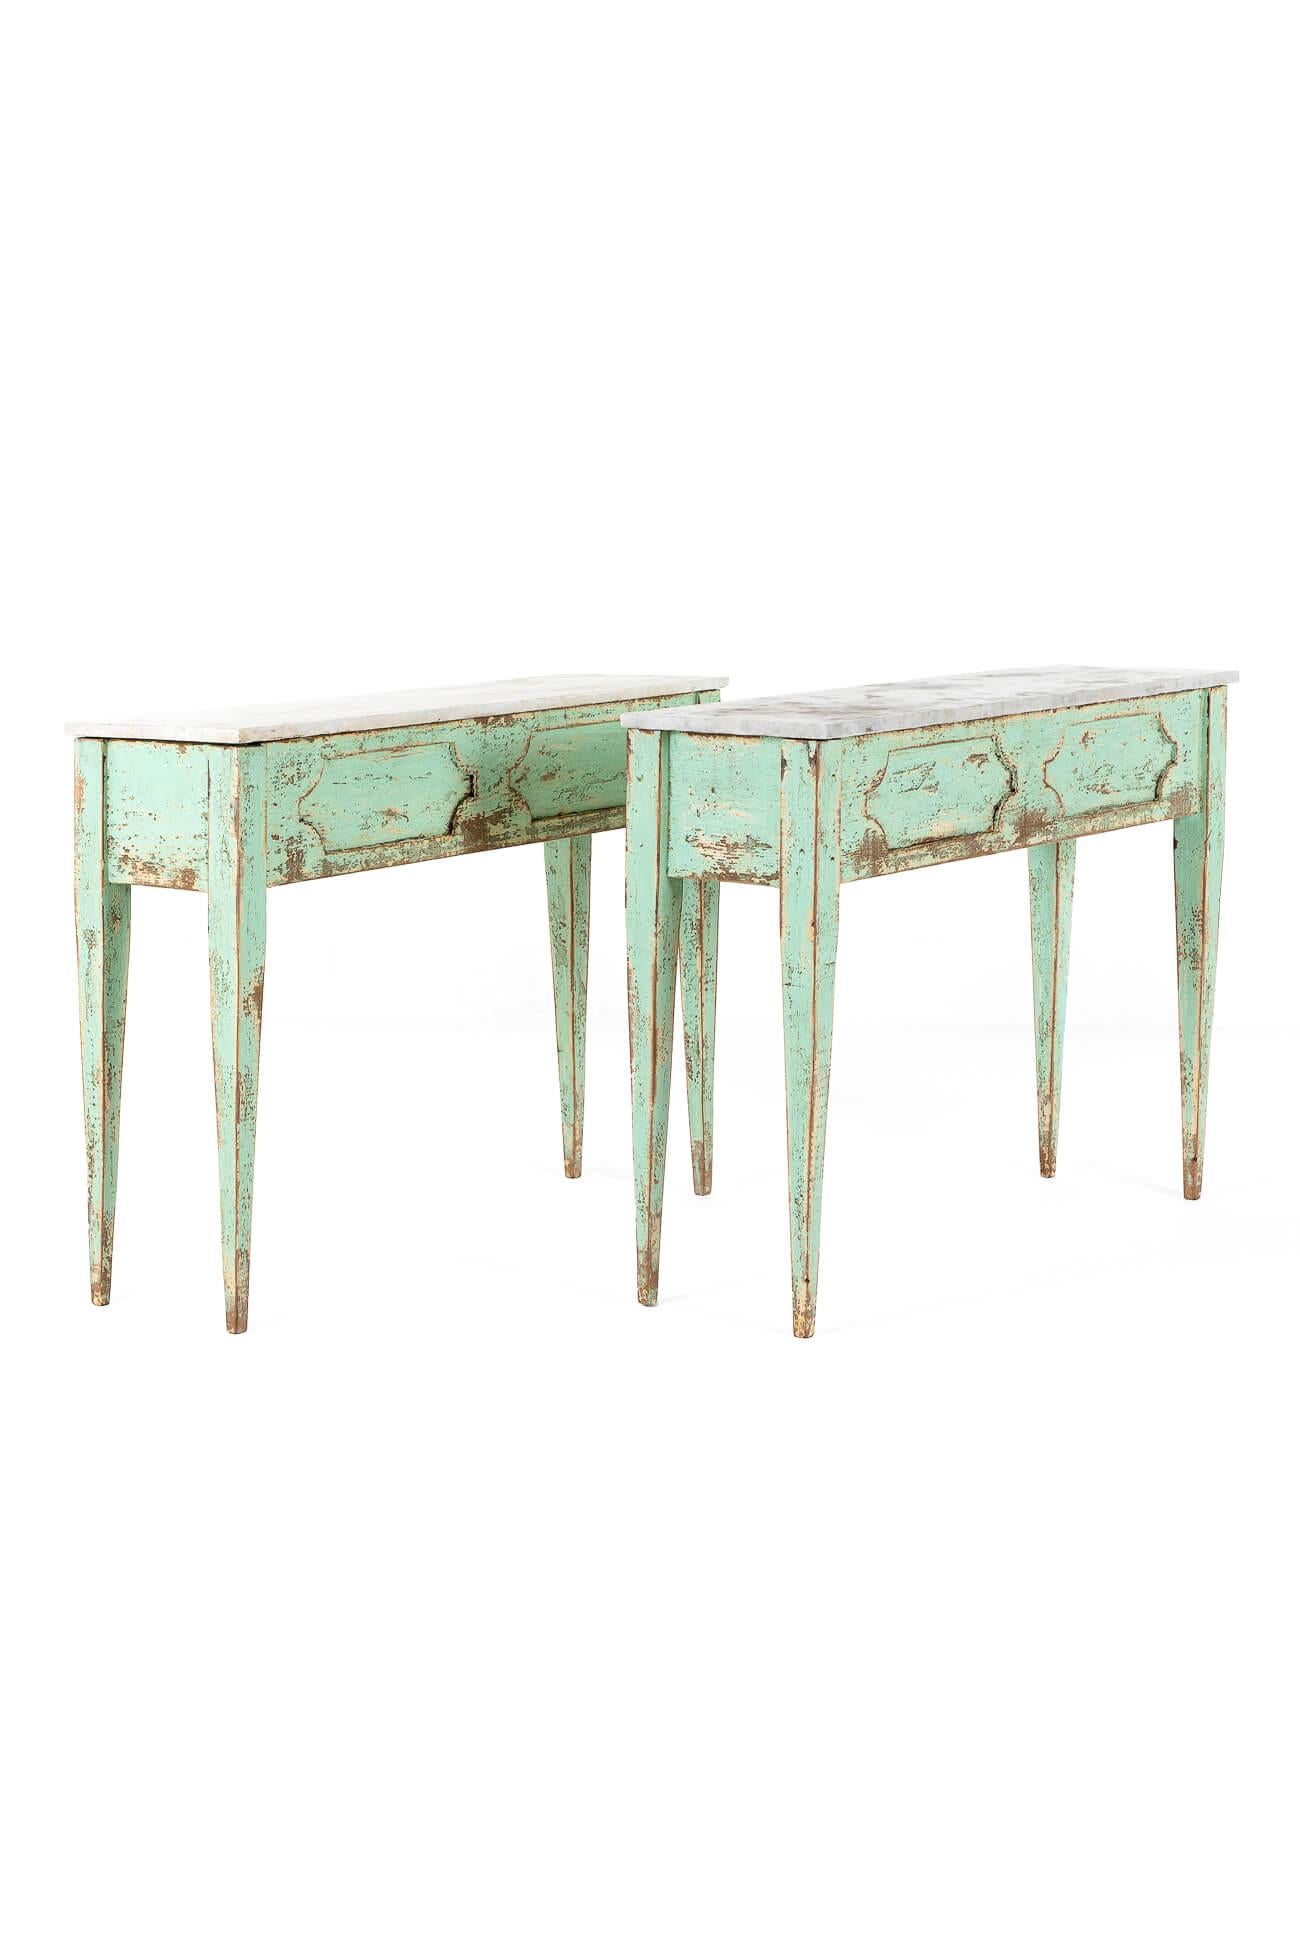 A wonderful pair of console tables with aged mottled white marble tops.

The bases in a chipped mint green finish both have a molded freize to the front and are raised on carved tapered legs.

Price is for the pair.

Italian, 20th